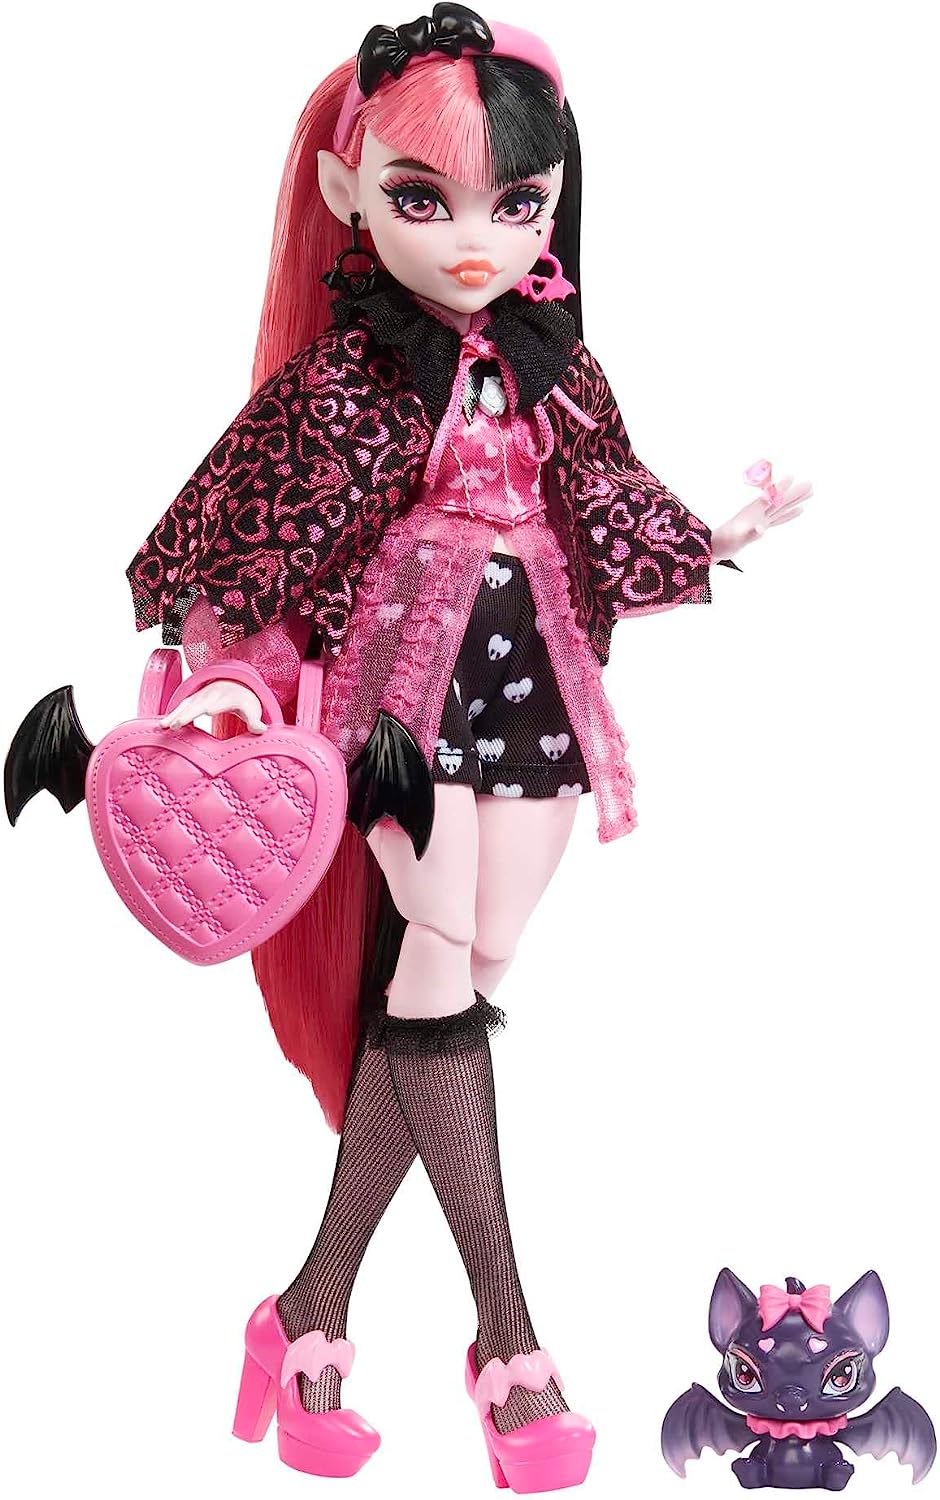 Monster High Doll, Draculaura with Accessories and Pet Bat, Posable Fashion Doll